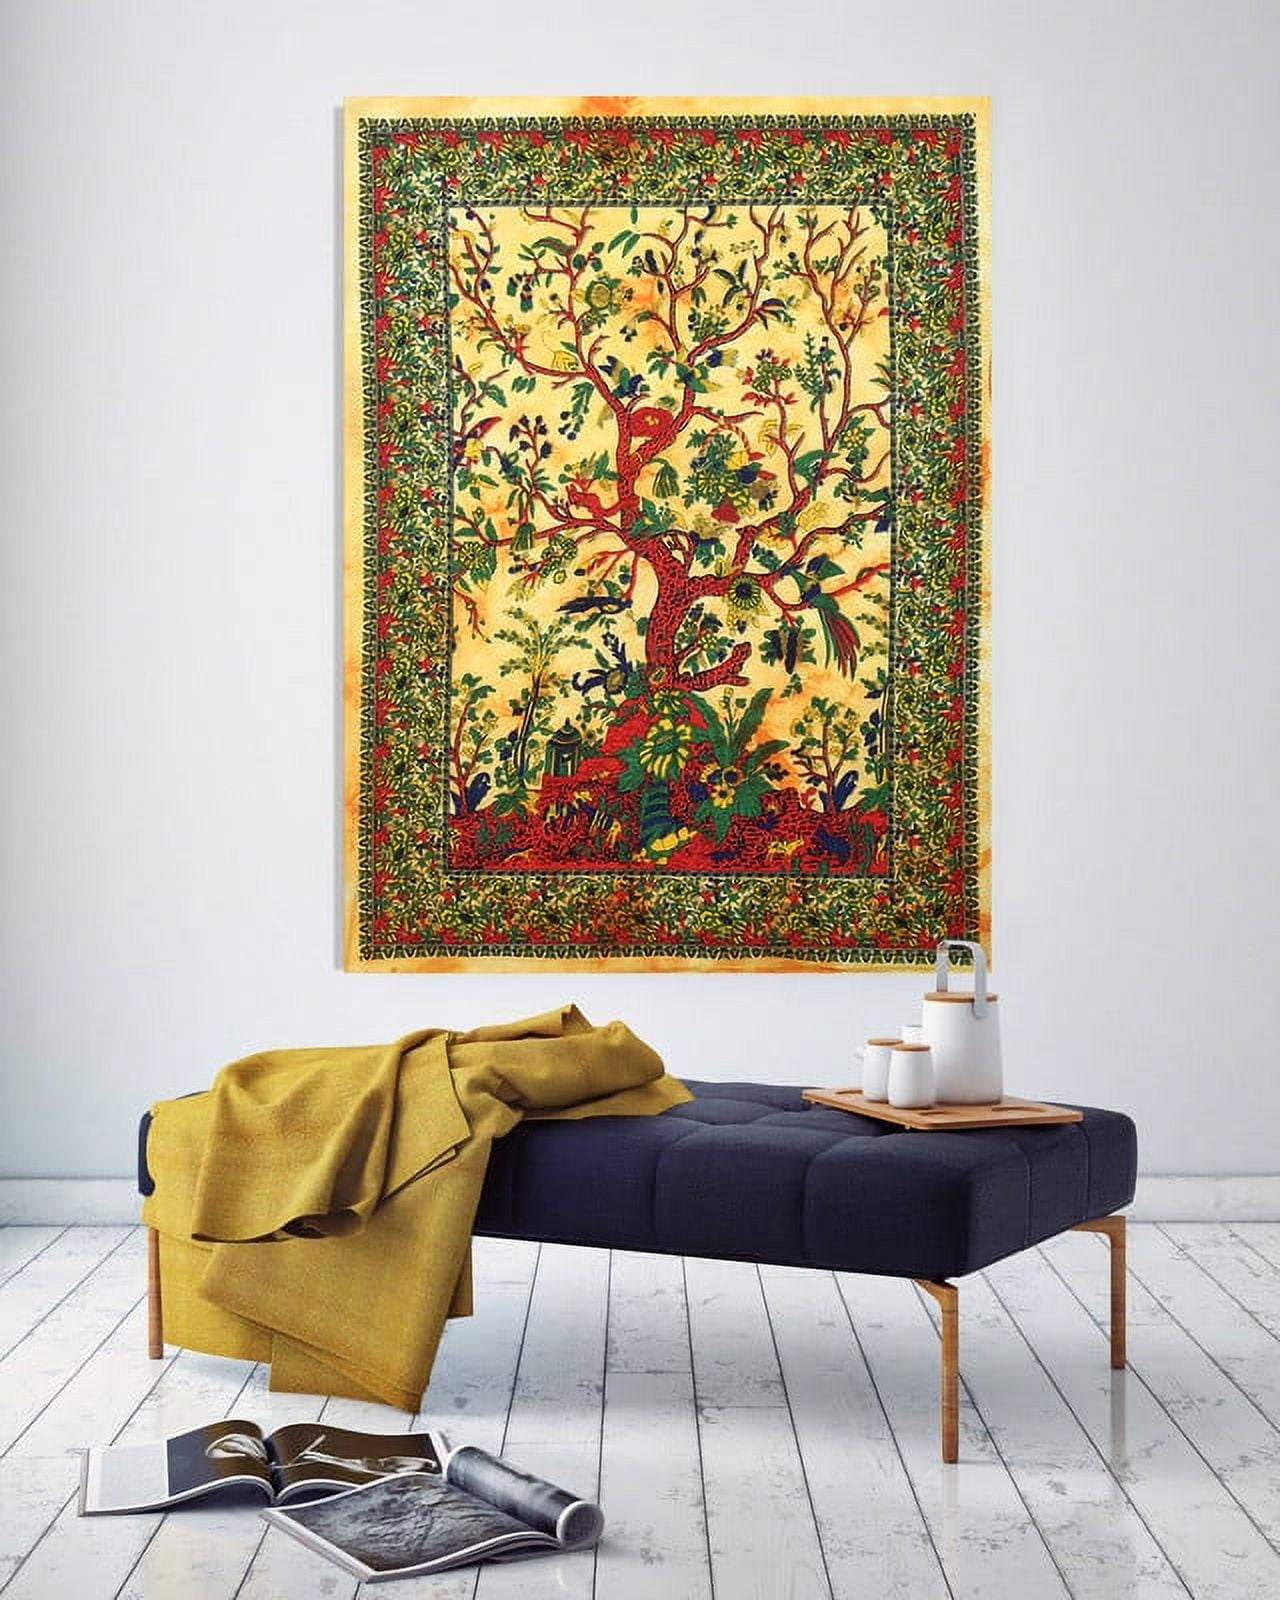  UNZYE Tapestries for Room Tapestry Wall Hanging Kit Wood Creek  Tapestry 3D Illusion Tapestries Wall Hanging Decor Green Wall Hanging  Blanket Fabric Art Decorations 200x150CM : Home & Kitchen